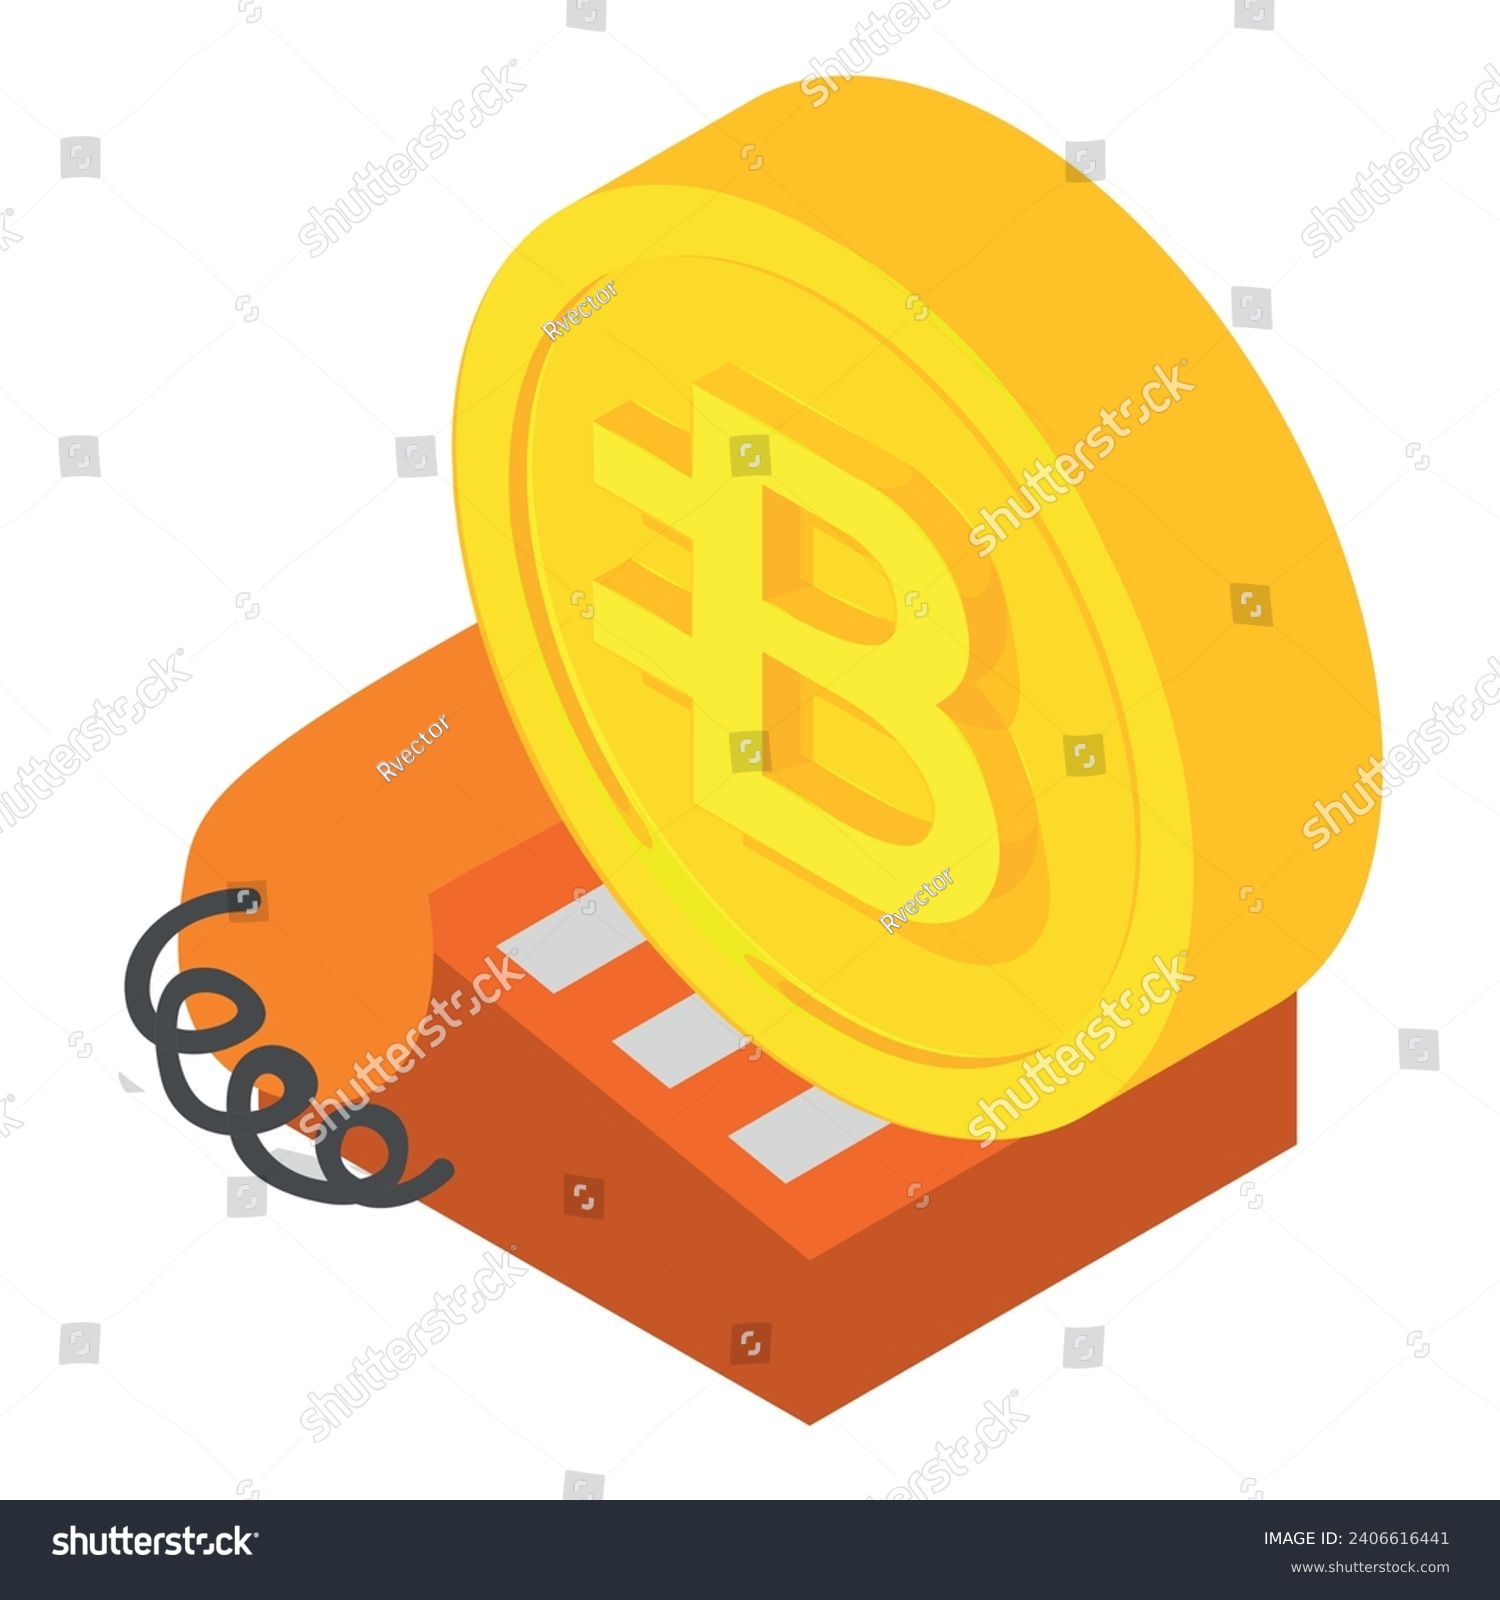 SVG of Bytecoin cryptocurrency icon isometric vector. Bytecoin coin and landline phone. Digital money, cryptocurrency concept svg